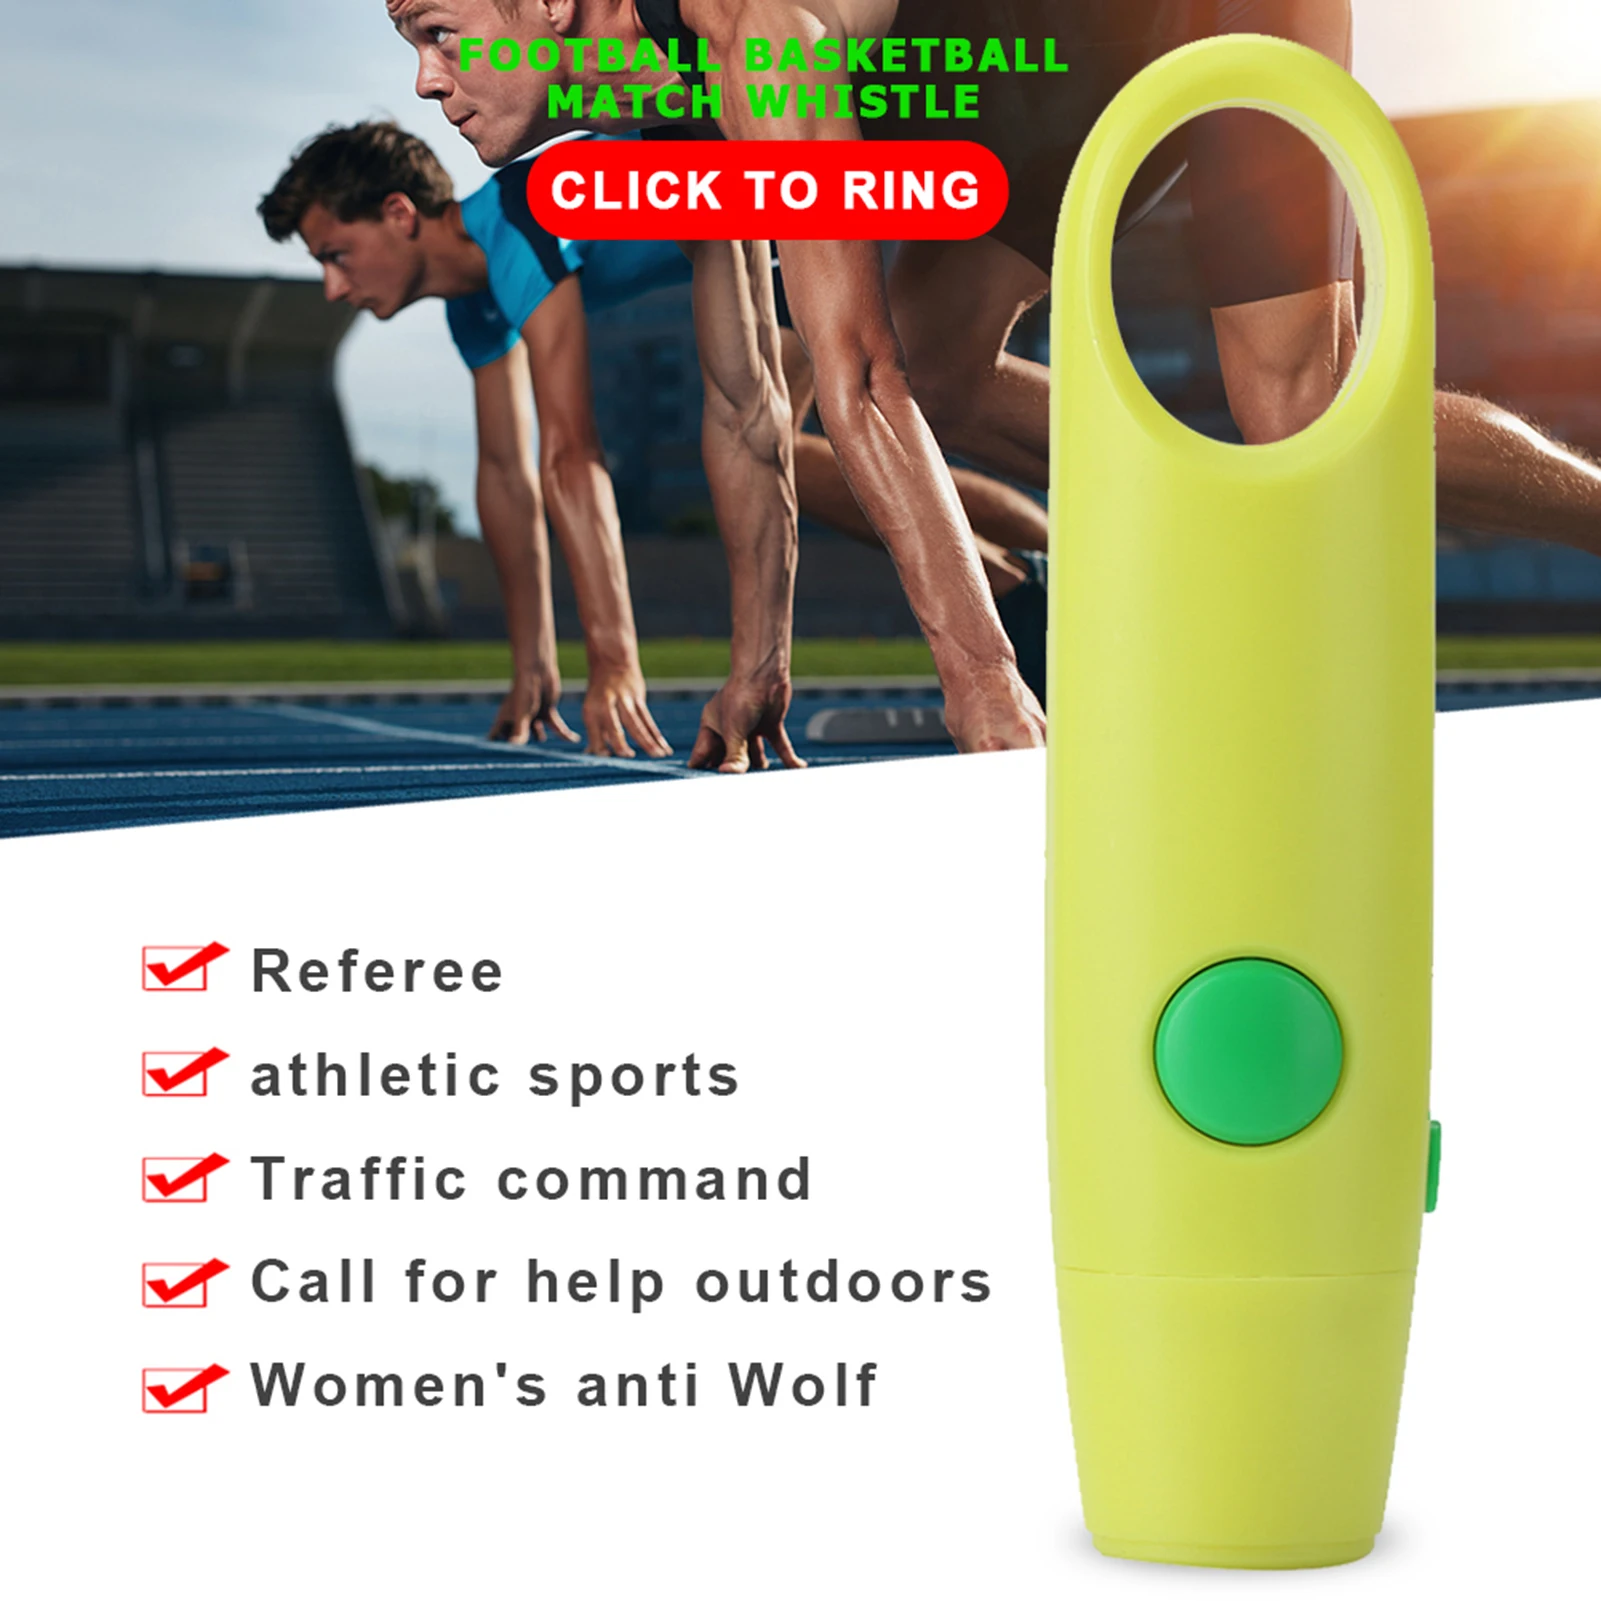 Running Electronic Whistle Practical Competition Basketball Outdoor Training Electric Whistle Cheerleading Football Referee Tone